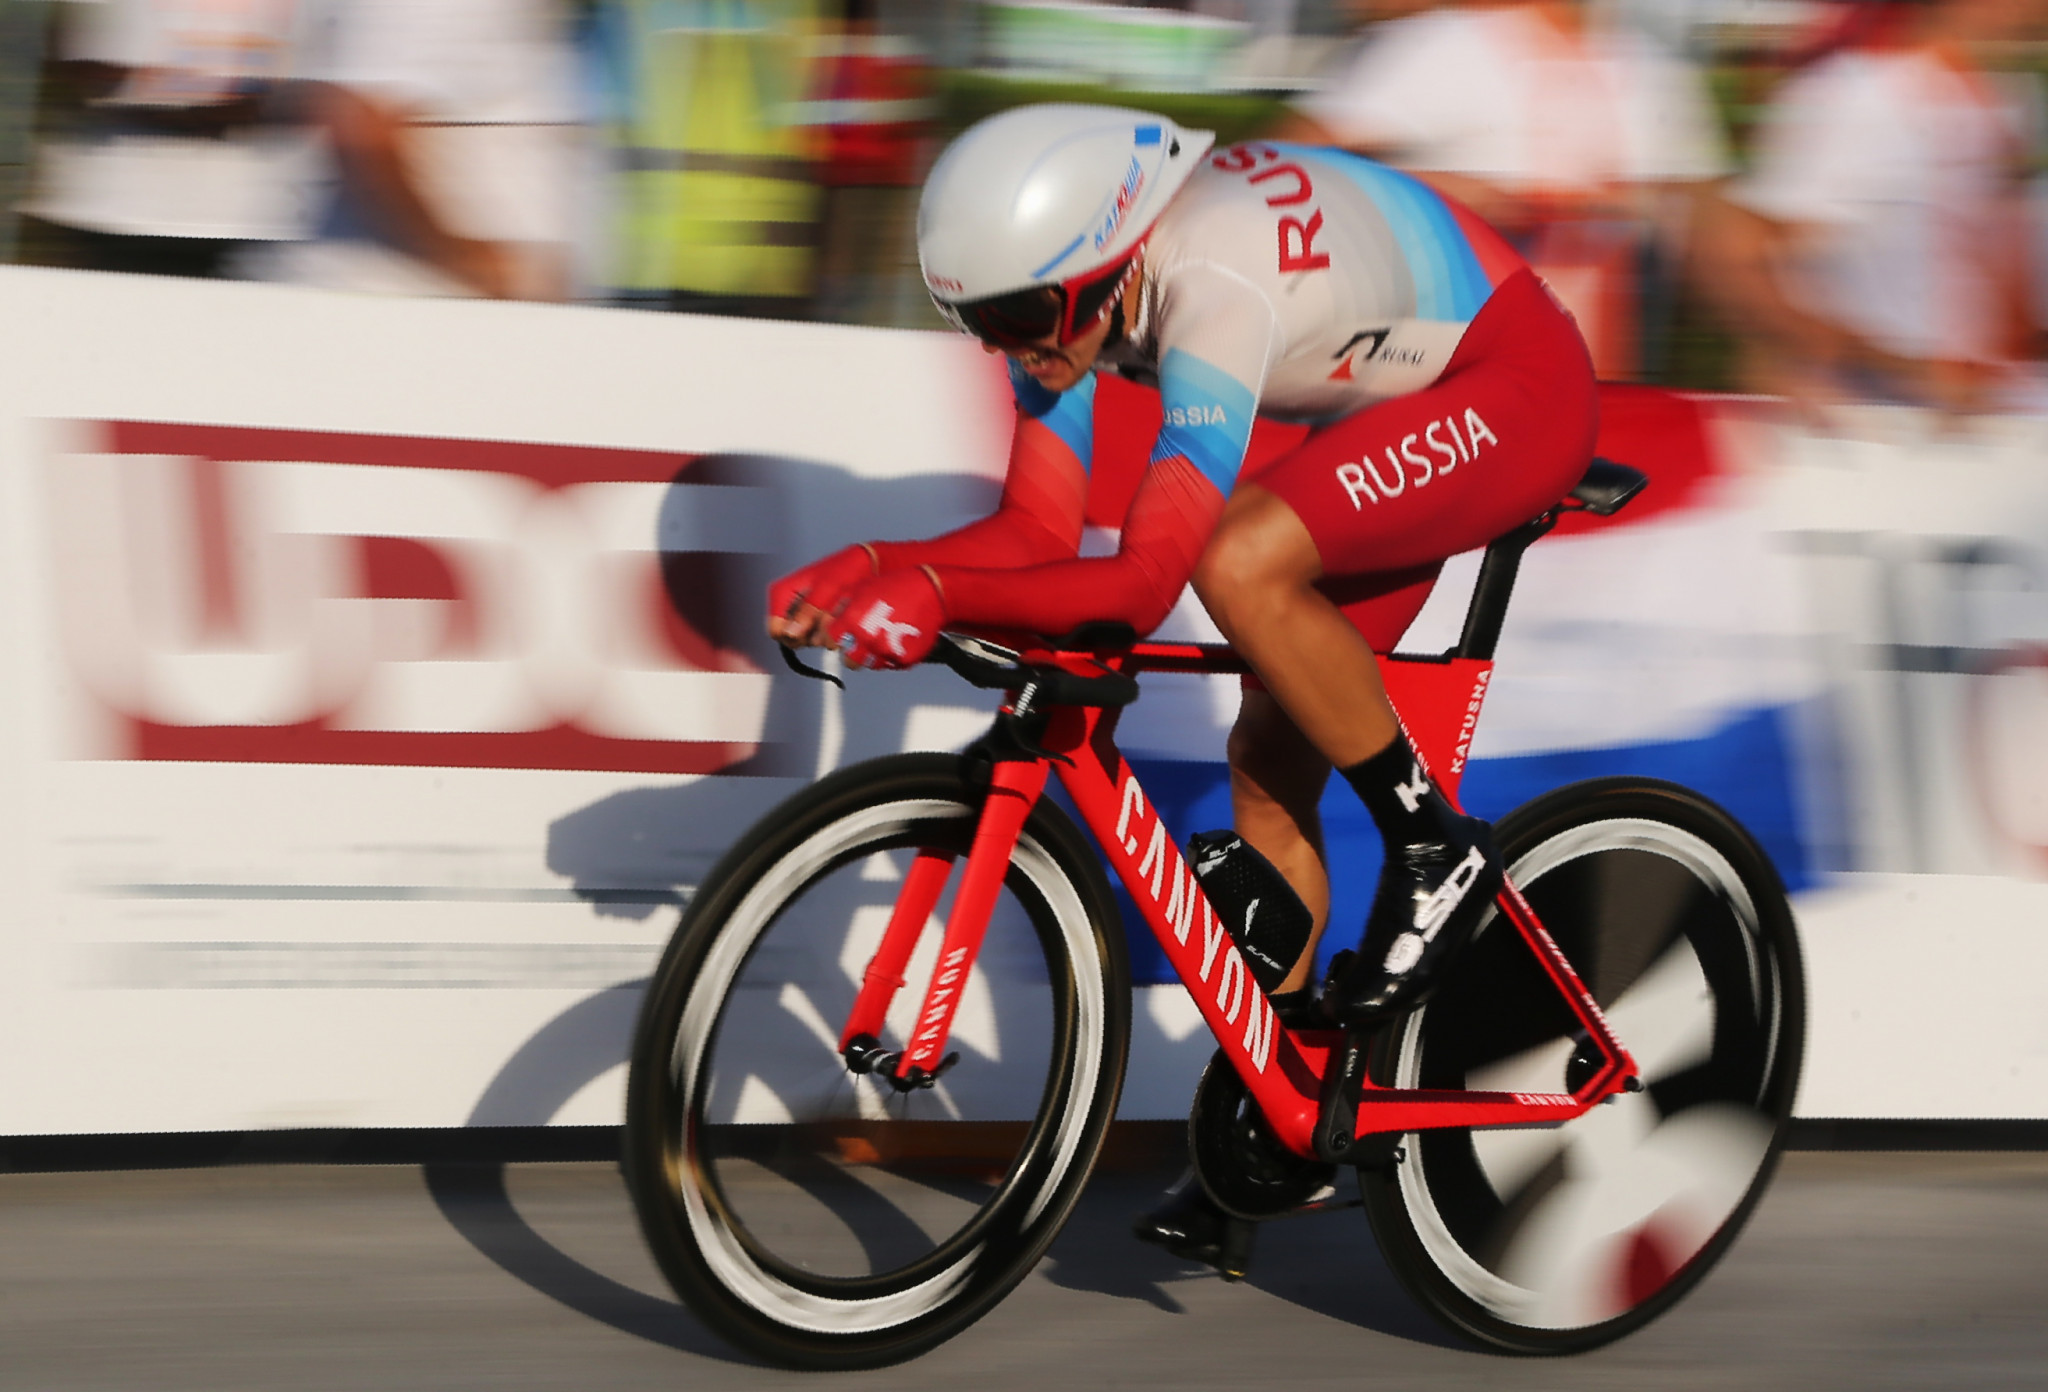 Anton Vorobyev tasted victory in the men's individual time trial at the World Military Games ©Getty Images